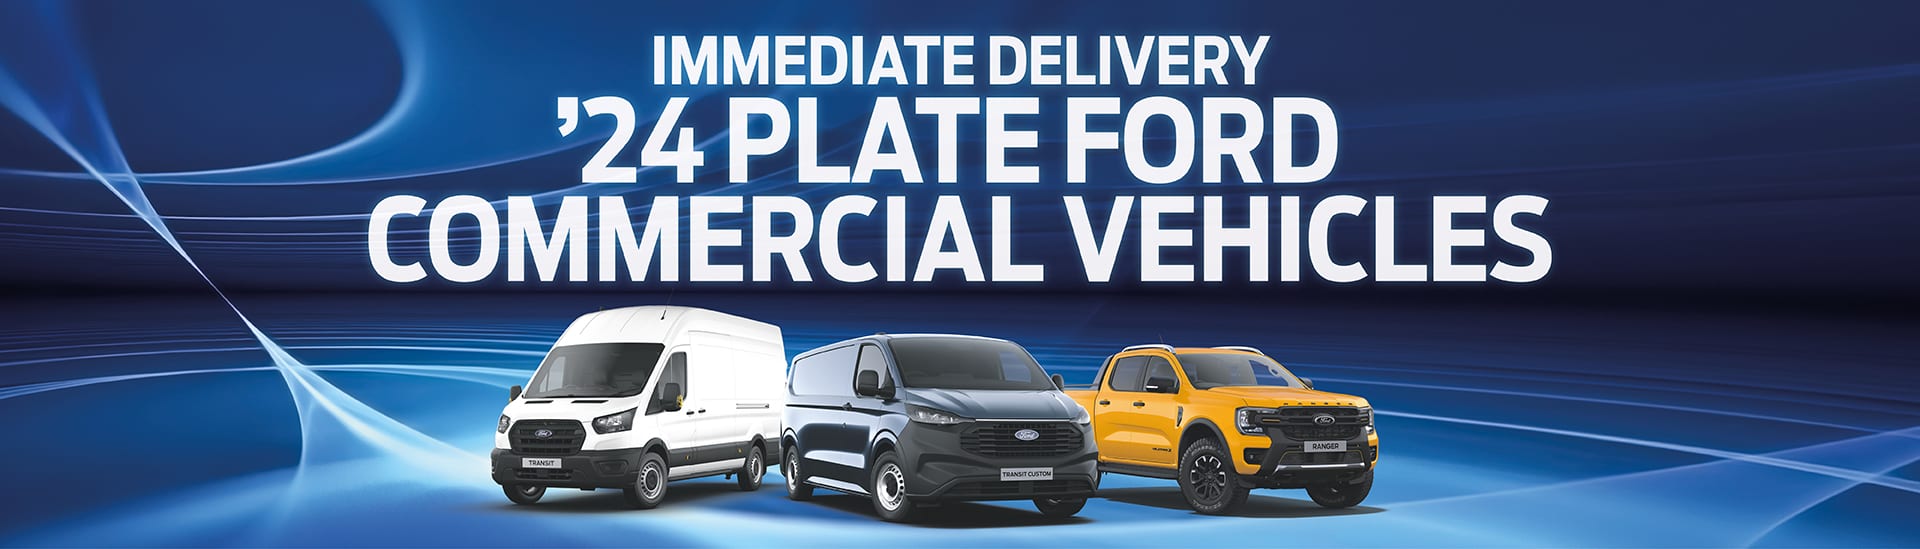 Ford Transit immediate delivery 